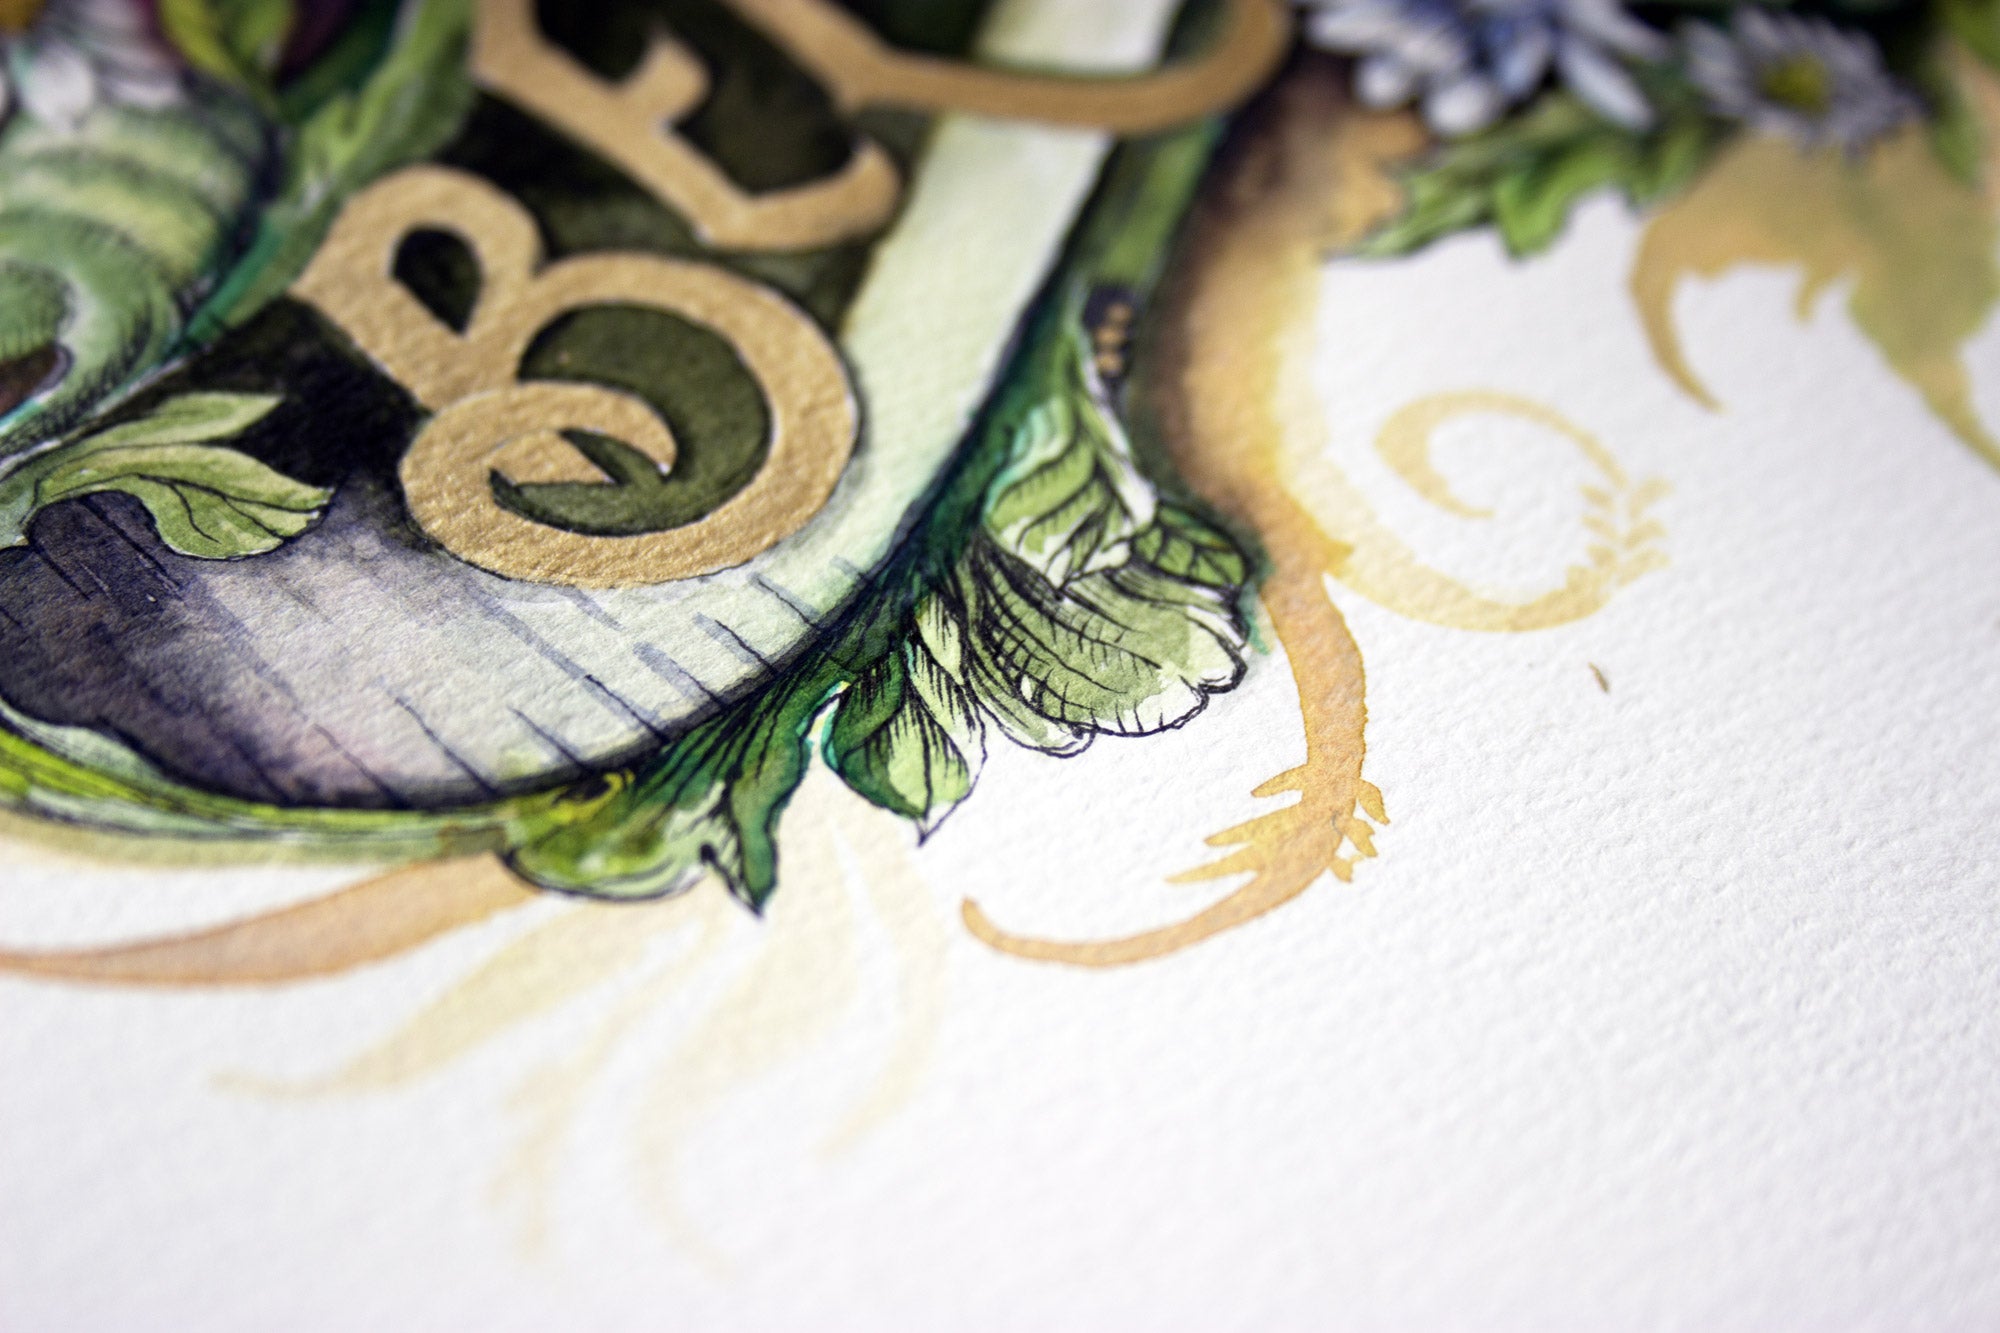 "Beloved" Colour Giclee Print with hand applied gold accent - A4 handlettering